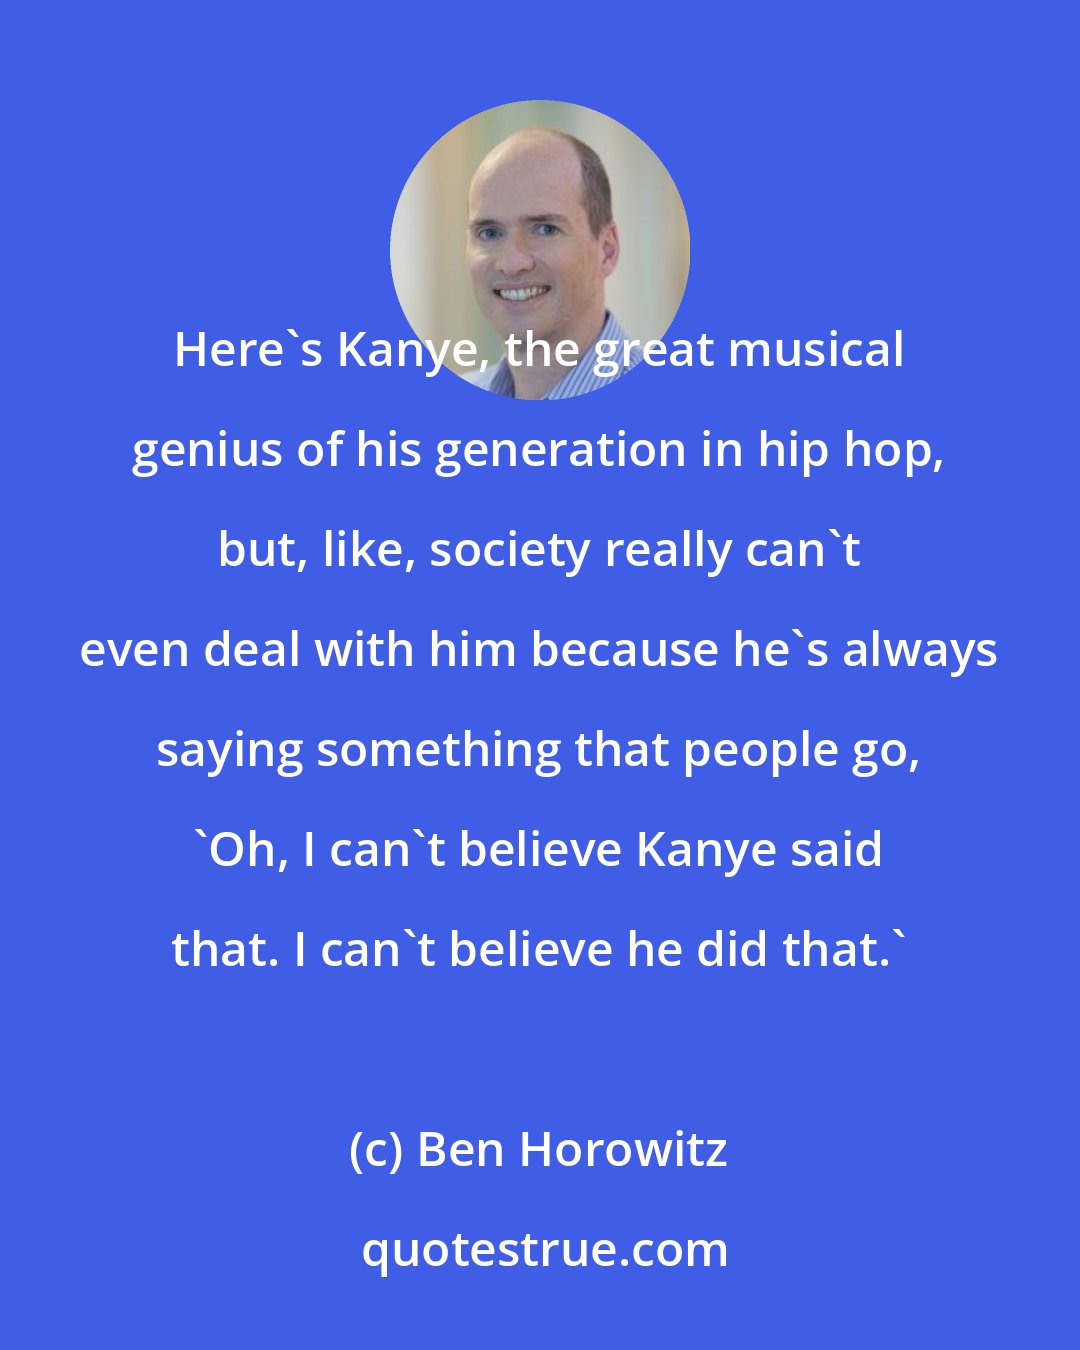 Ben Horowitz: Here's Kanye, the great musical genius of his generation in hip hop, but, like, society really can't even deal with him because he's always saying something that people go, 'Oh, I can't believe Kanye said that. I can't believe he did that.'